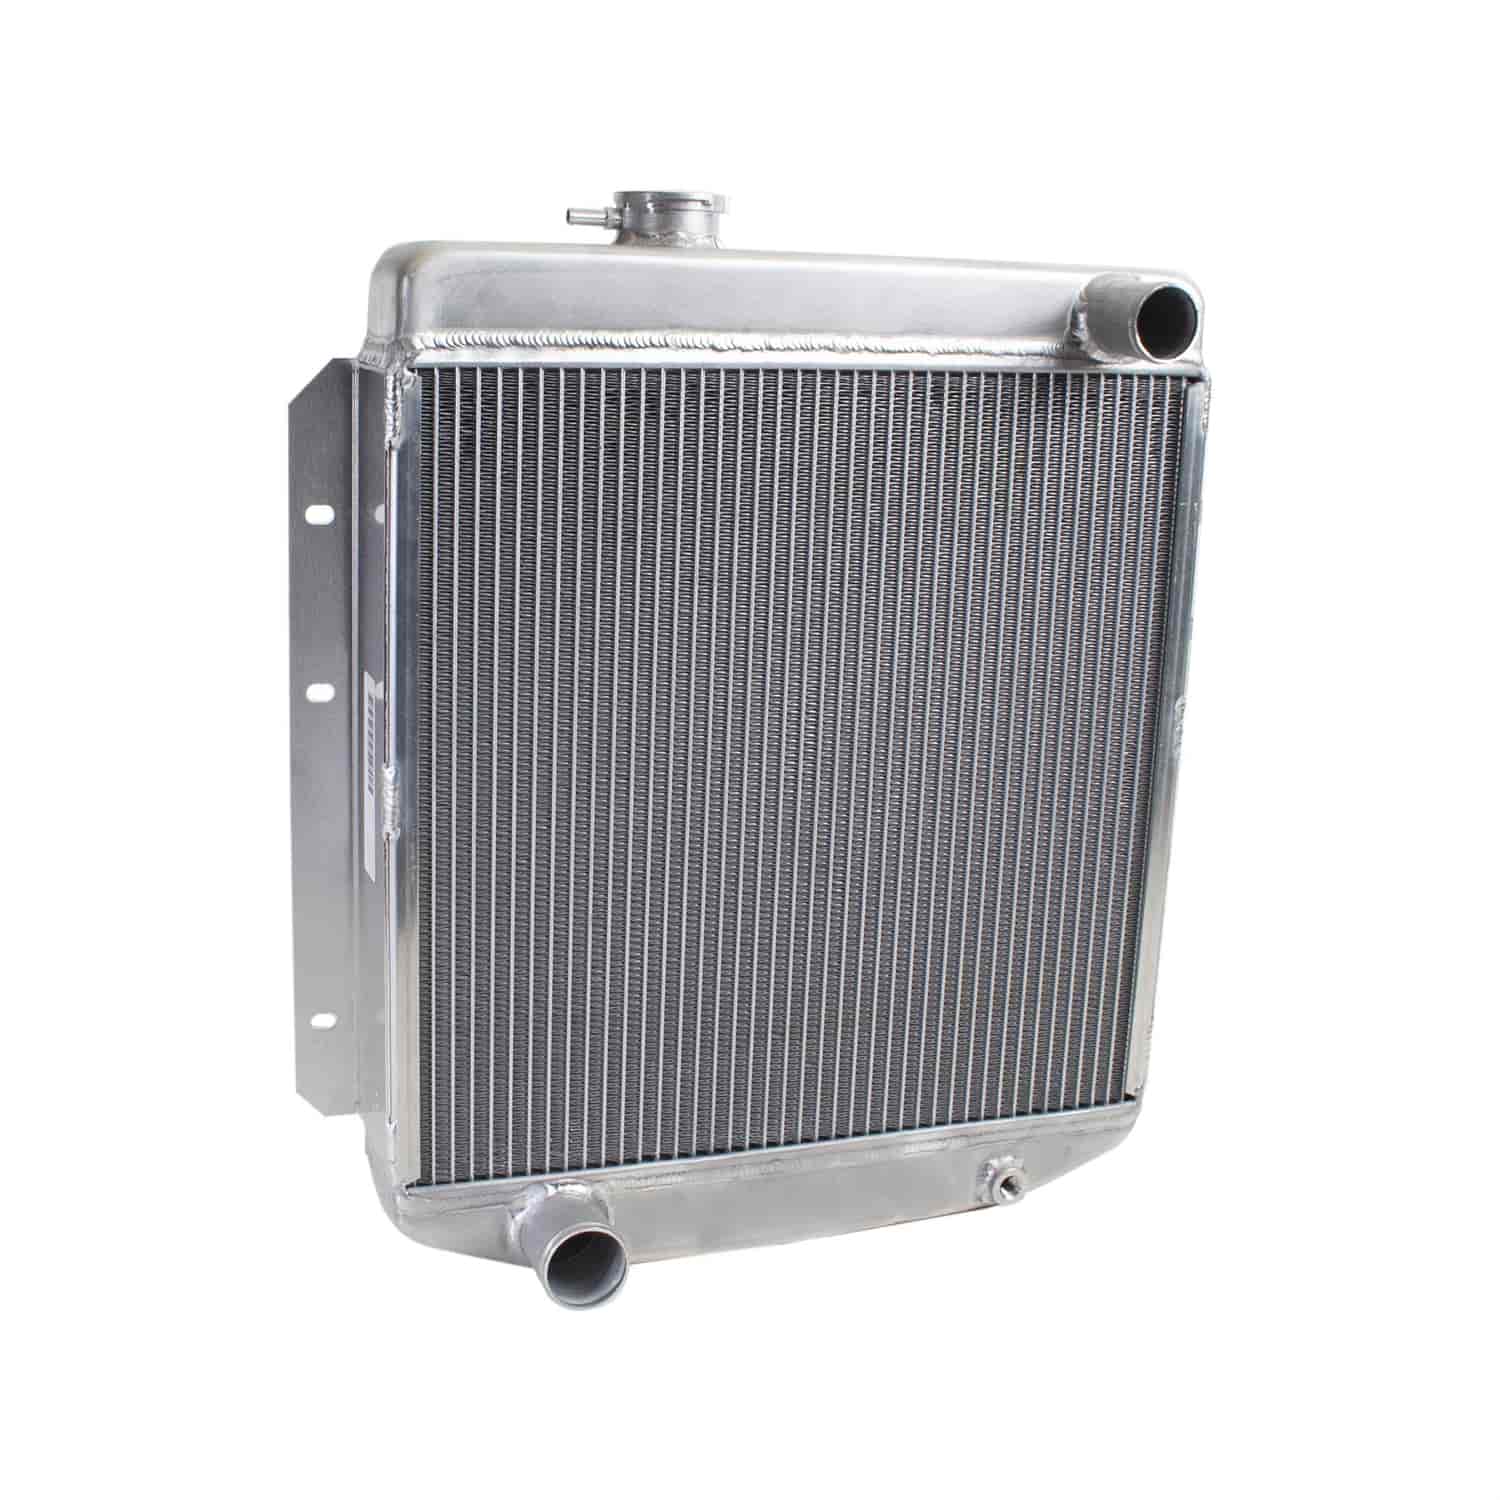 ExactFit Radiator for 1963-1965 Falcon/Comet & 1965-1966 Ford Mustang with Late Small Block & L6